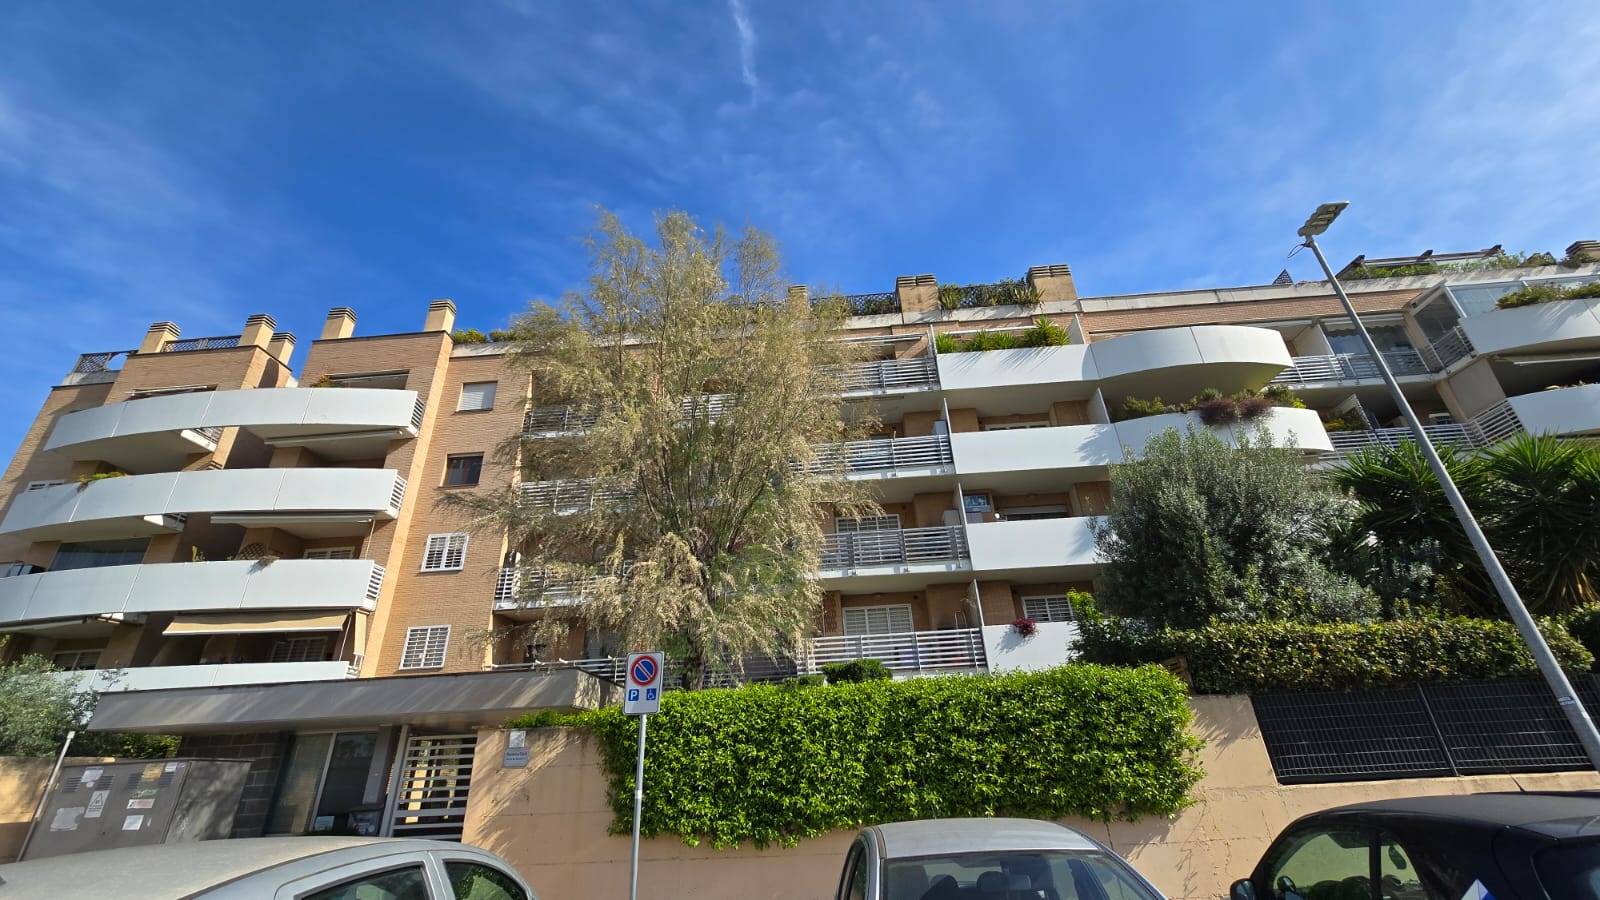 PORTA DI ROMA, ROMA, Apartment for rent of 70 Sq. mt., Good condition, Heating Non-existent, Energetic class: G, Epi: 175 kwh/m2 year, placed at 